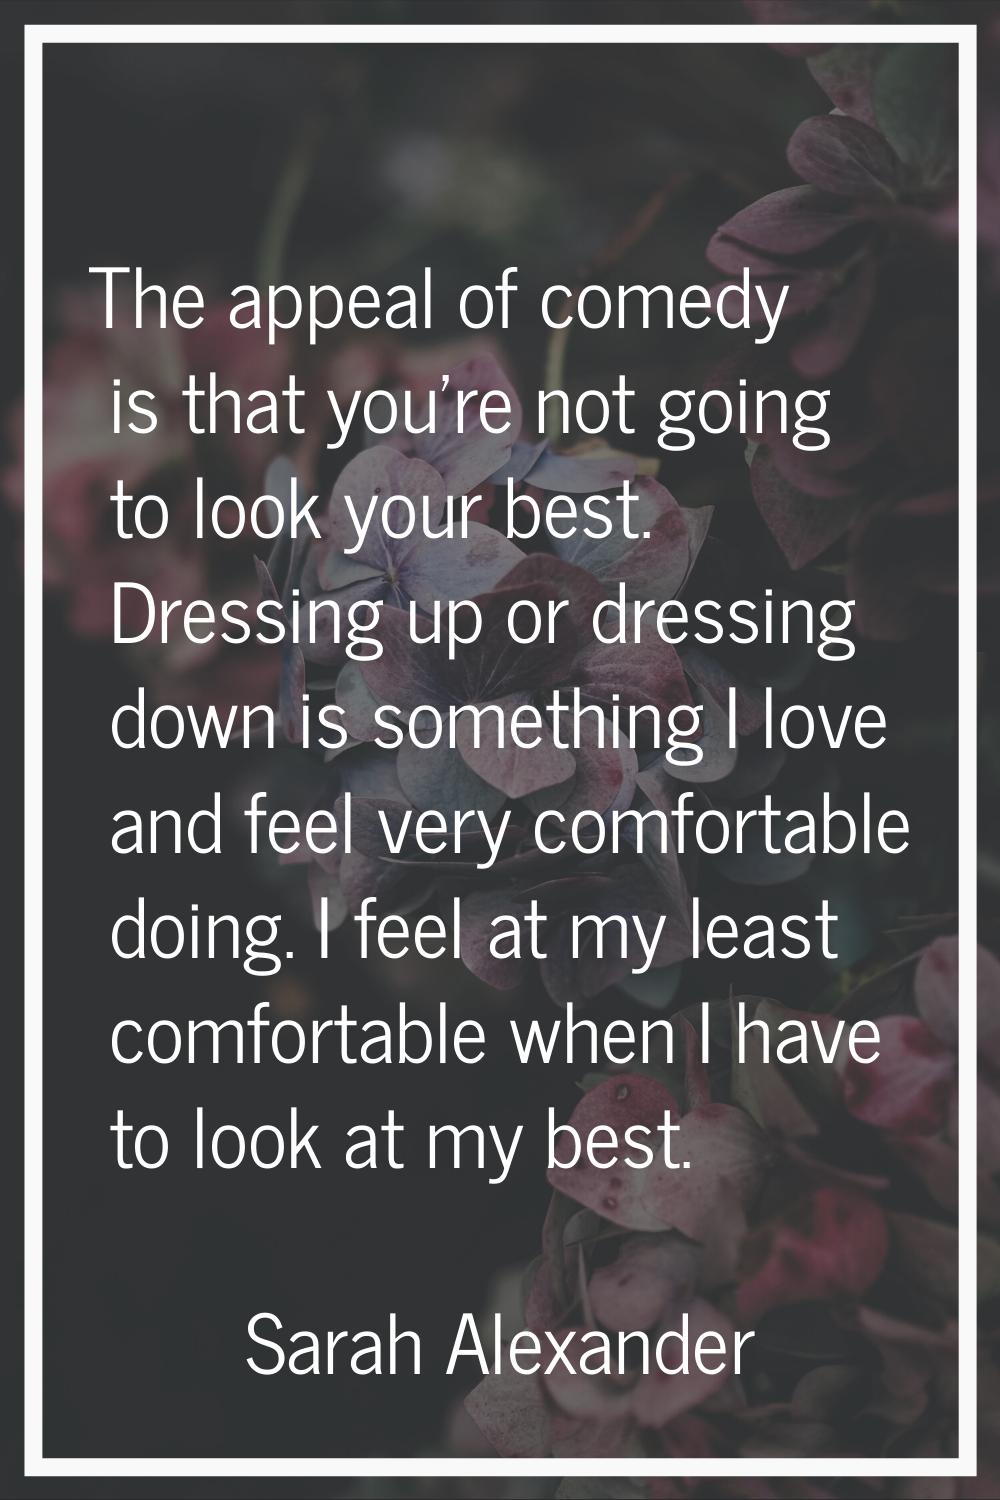 The appeal of comedy is that you're not going to look your best. Dressing up or dressing down is so